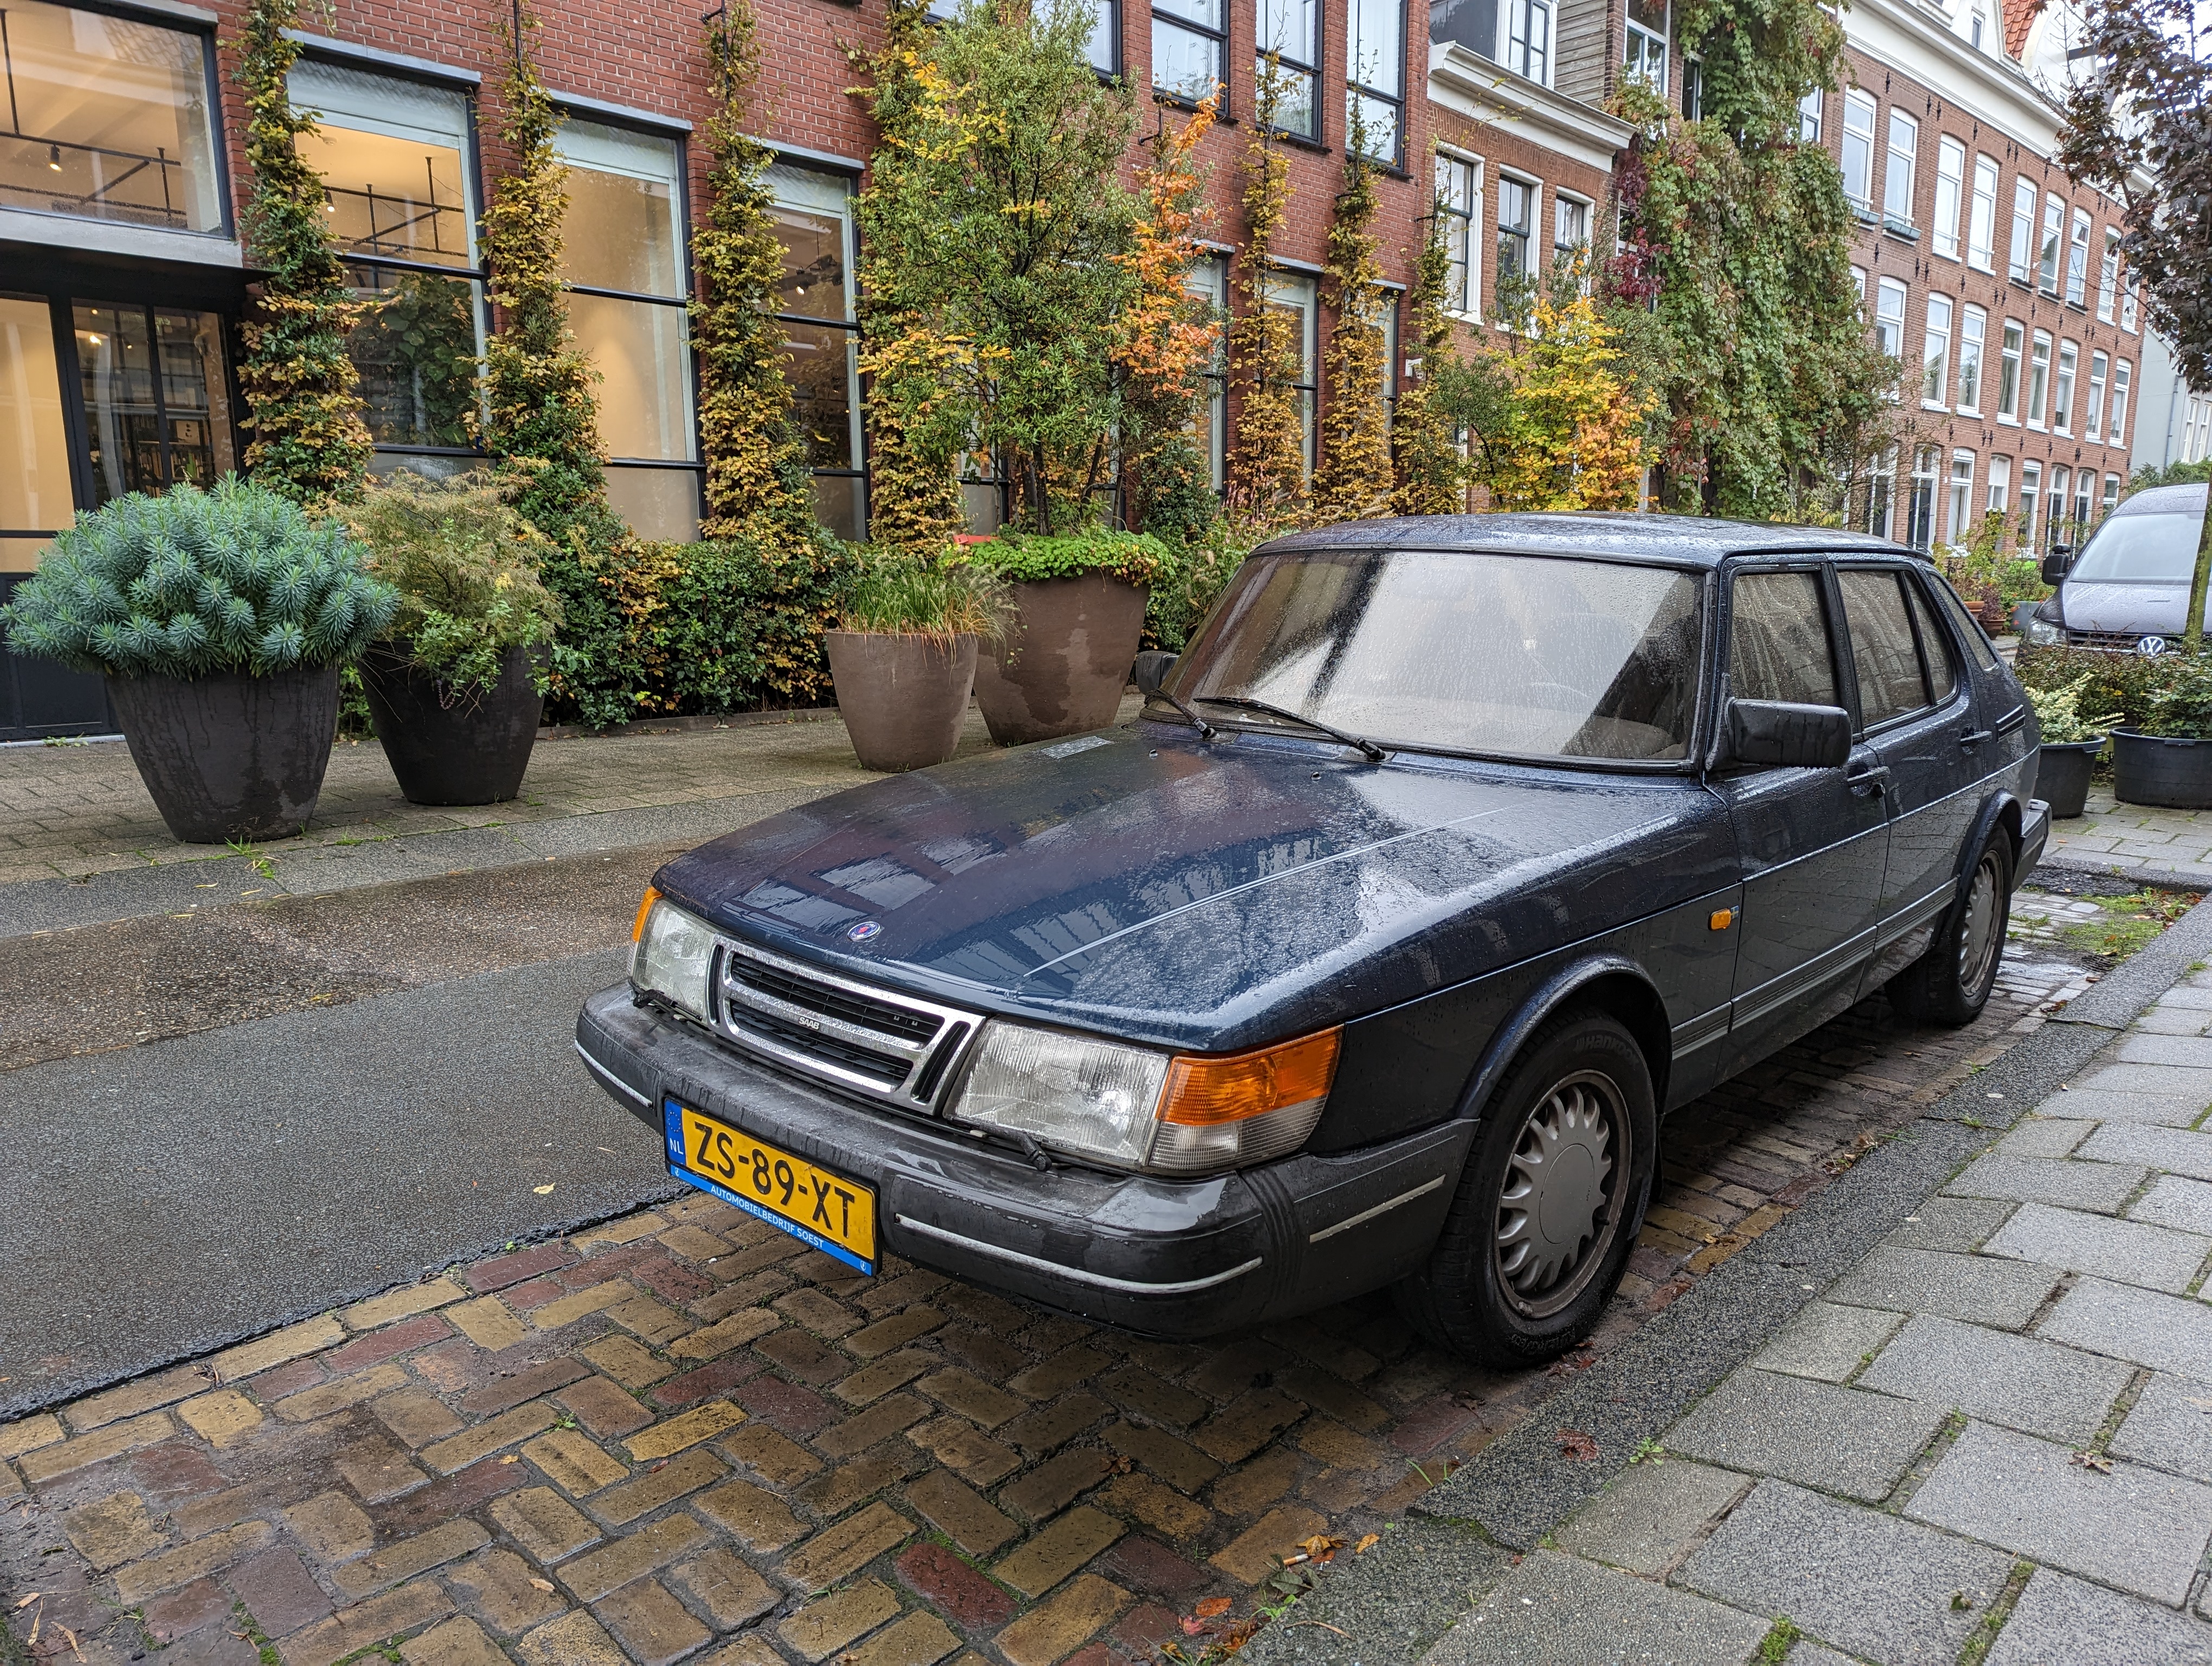 Classic Saab 900 in Amsterdam, 1/67s, f/1.8, ISO48, 7mm/24mm equivalent